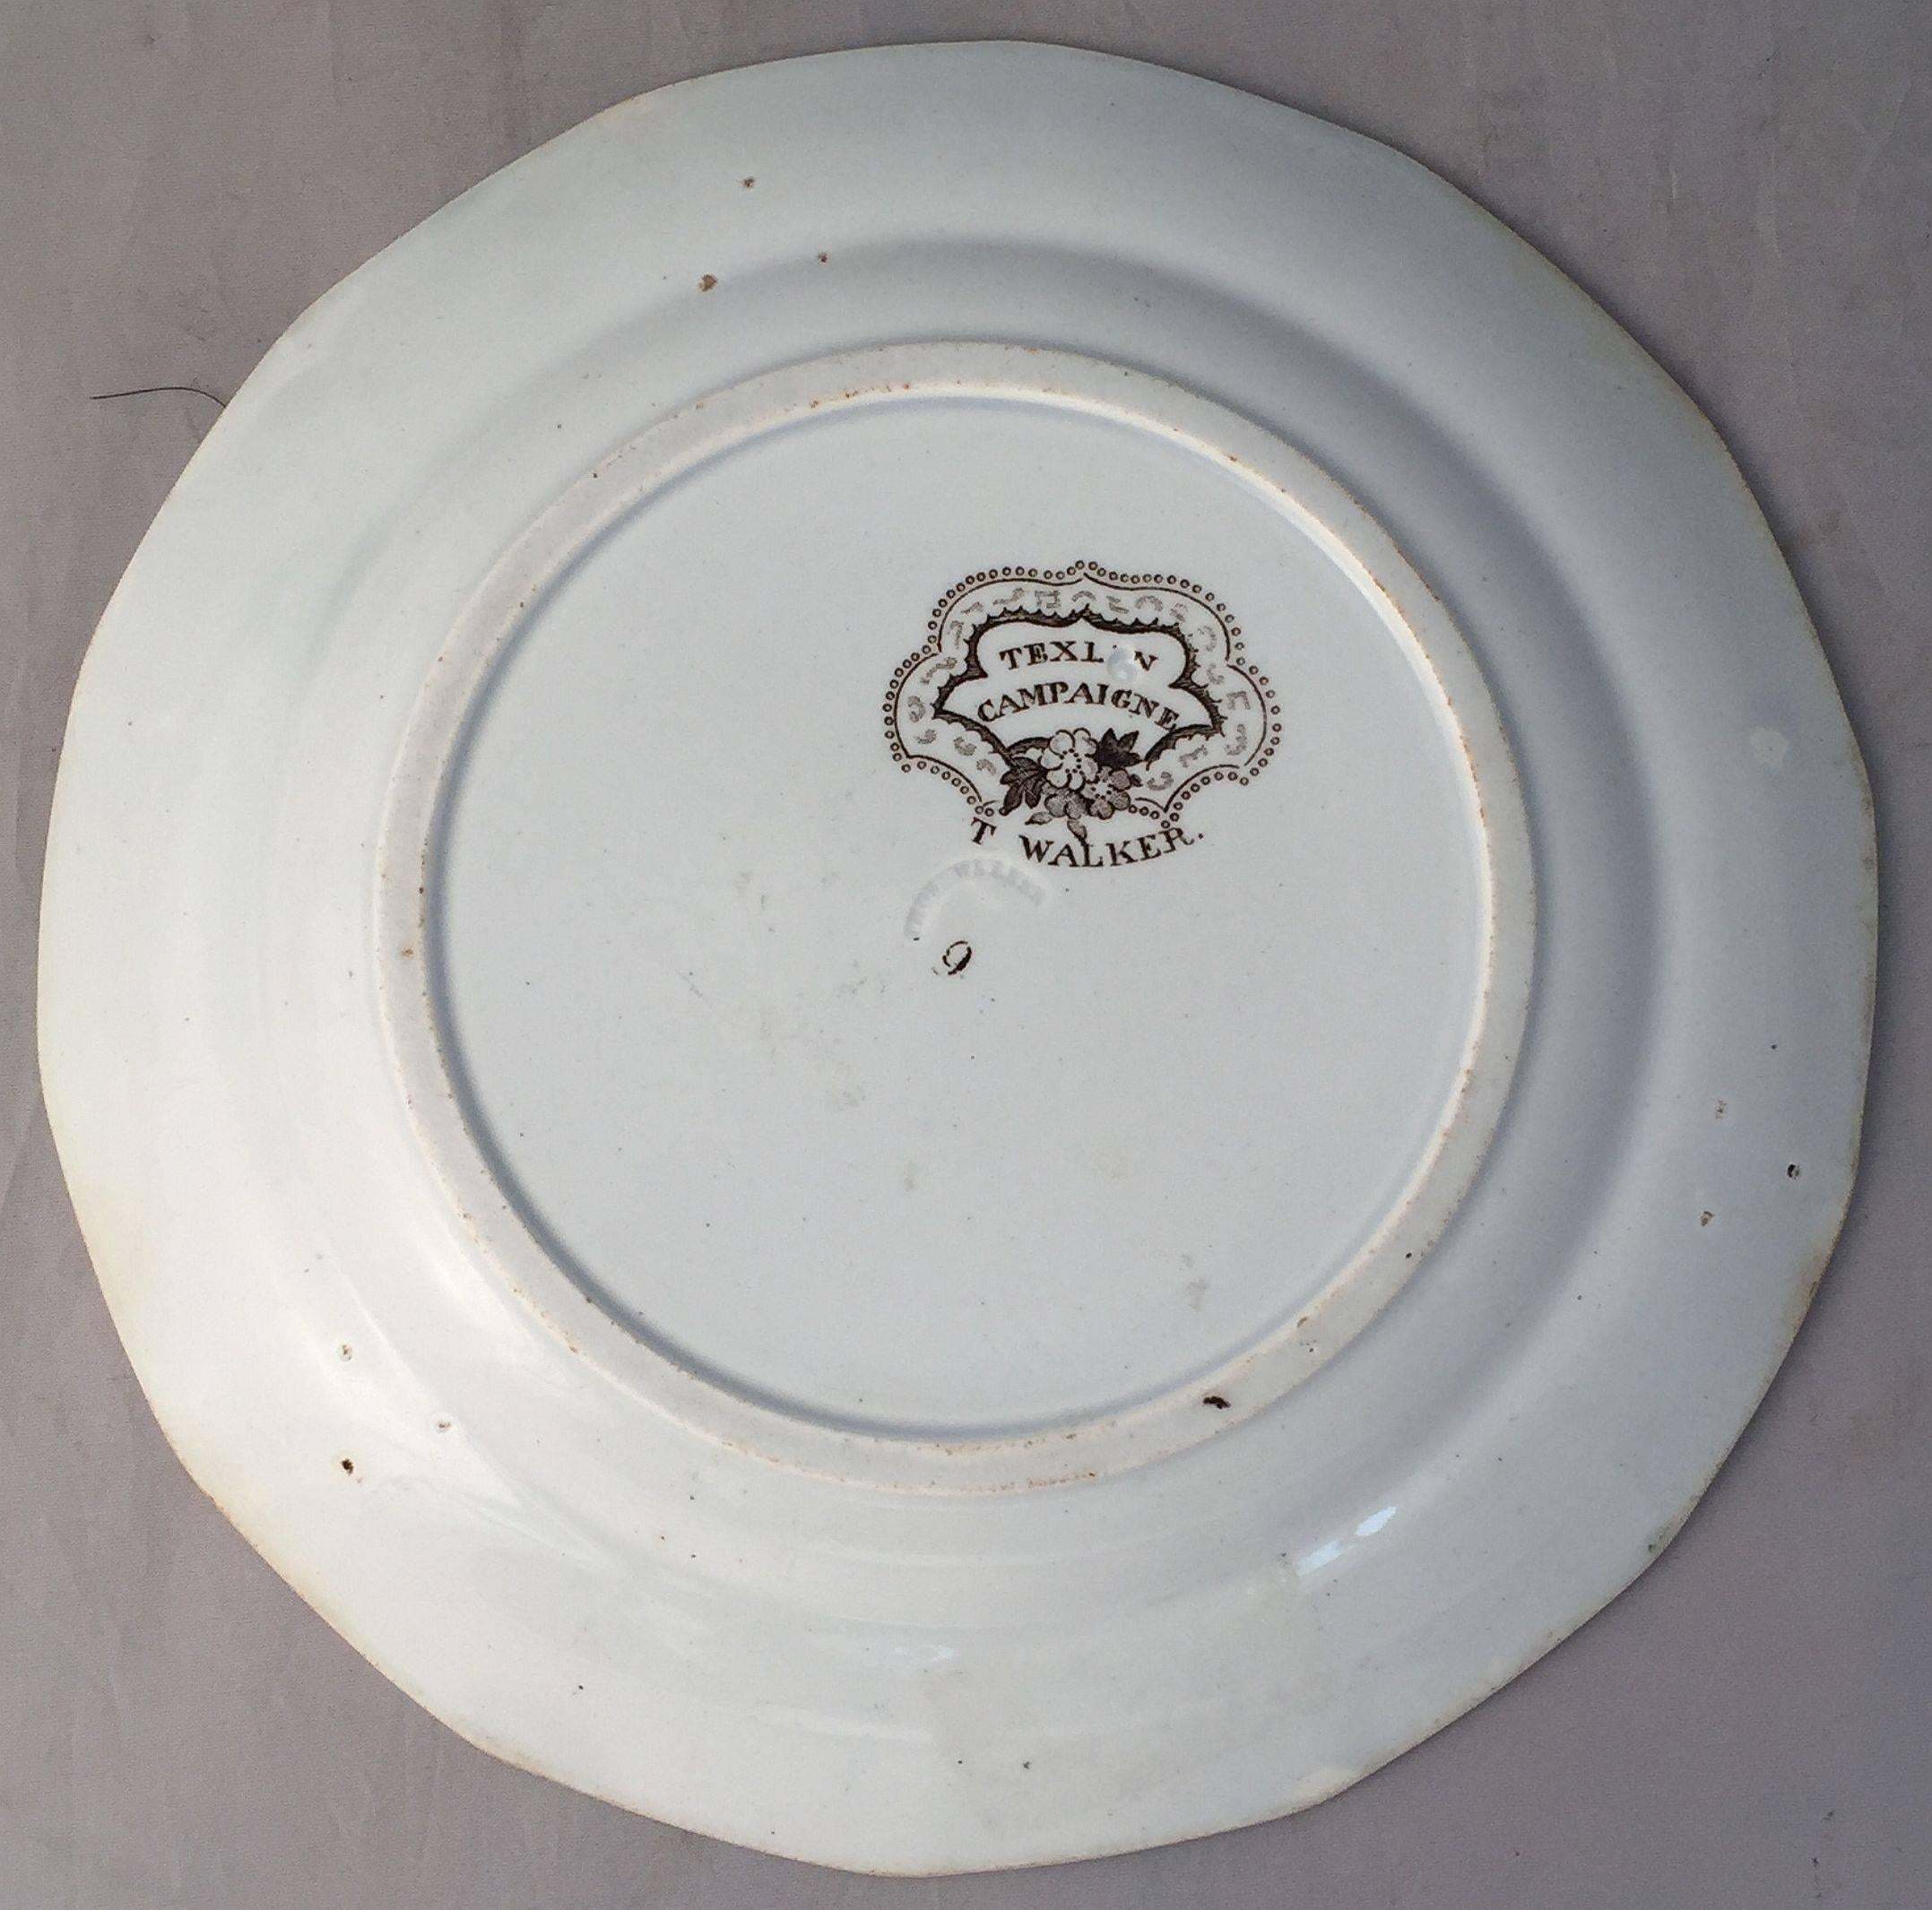 Pottery English Brown and White Plate, 'Texian Campaigne' by Thomas Walker